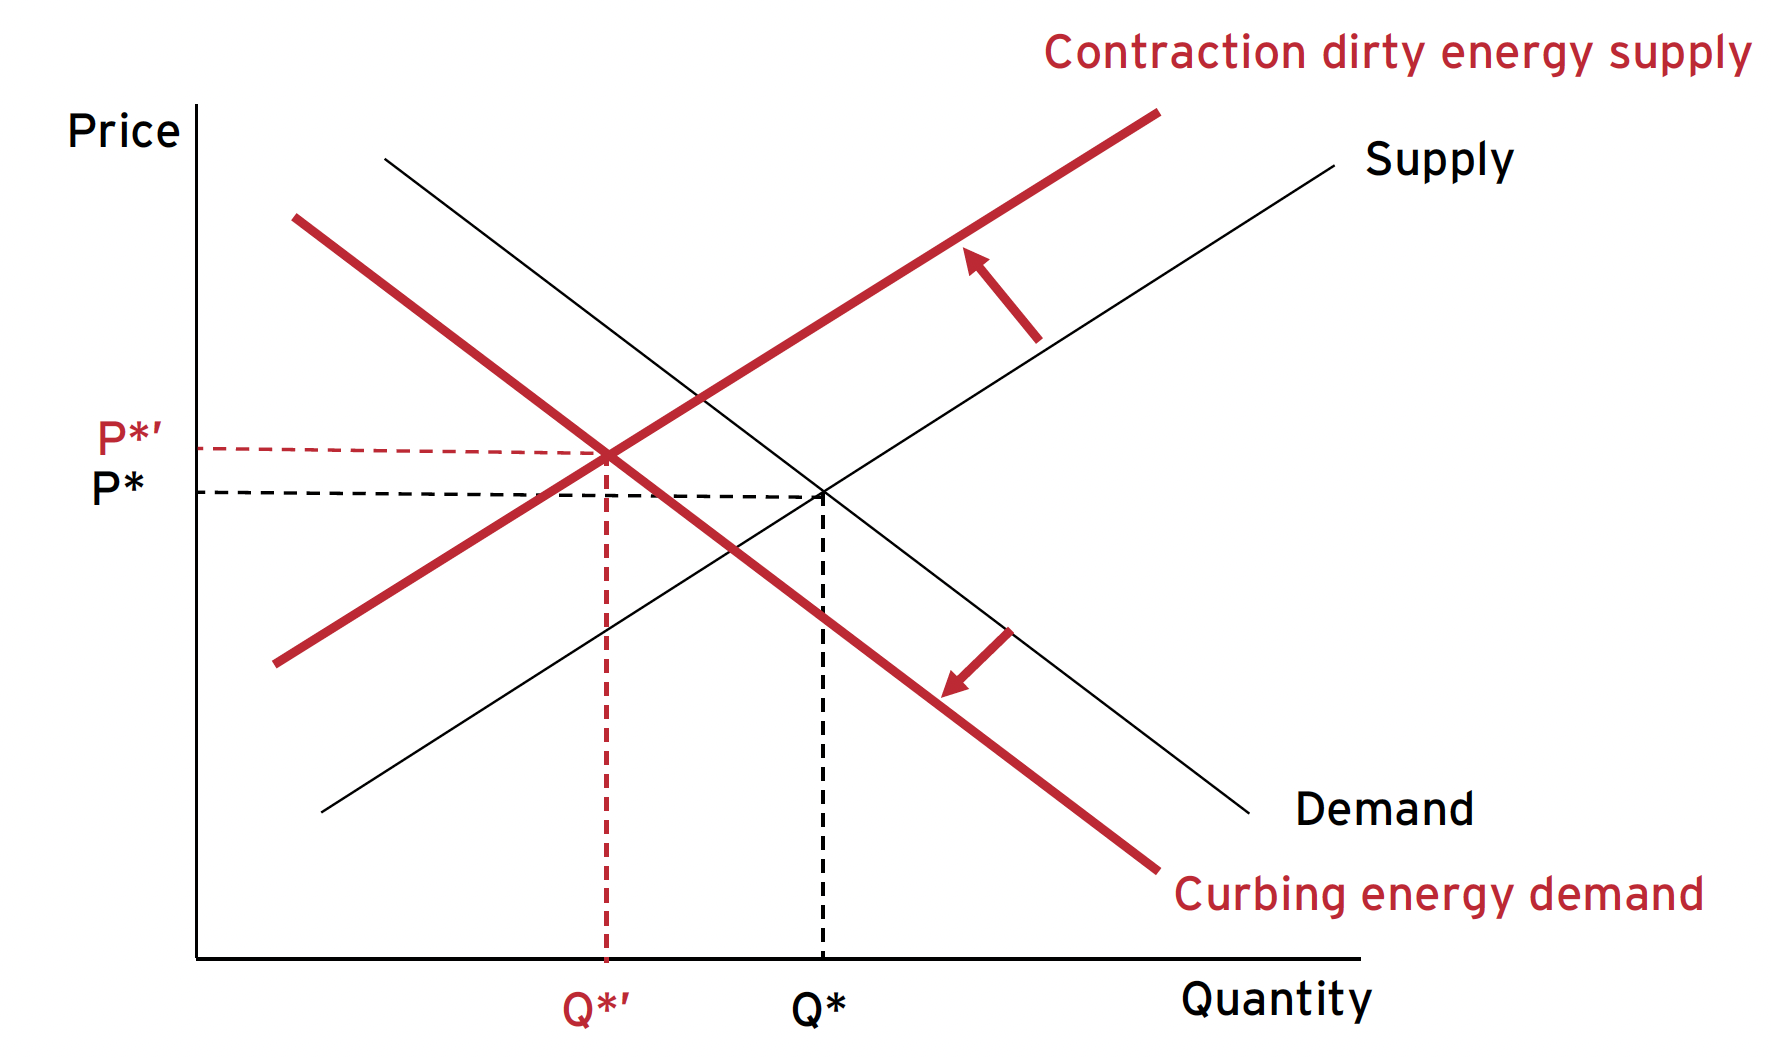 B) Contraction dirty energy supply and curbing energy demand